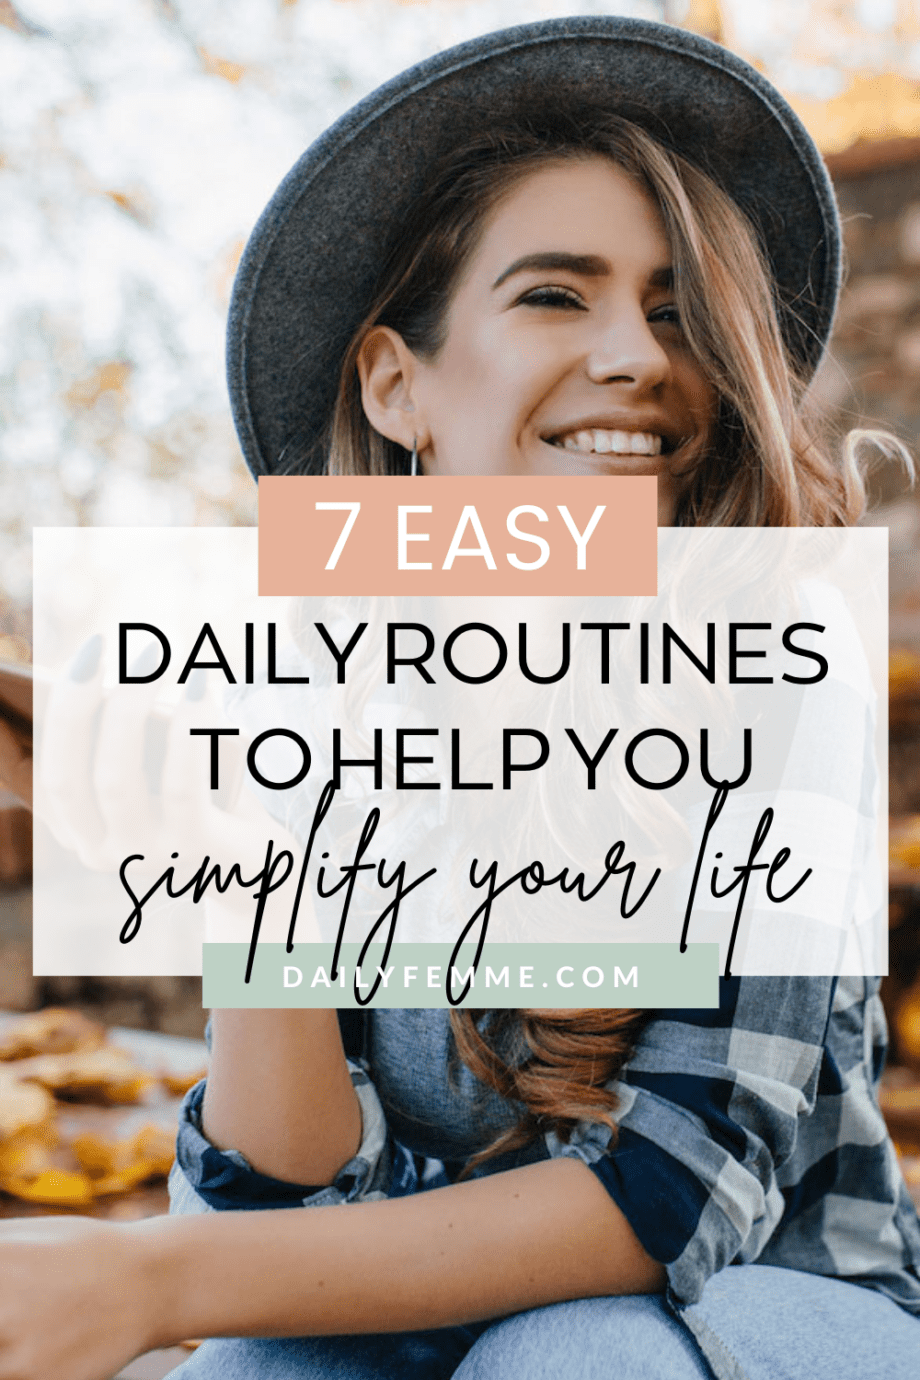 Daily routines are a brilliant way to help simplify your life, reduce overwhelm, and help you feel like you're in control of your day.